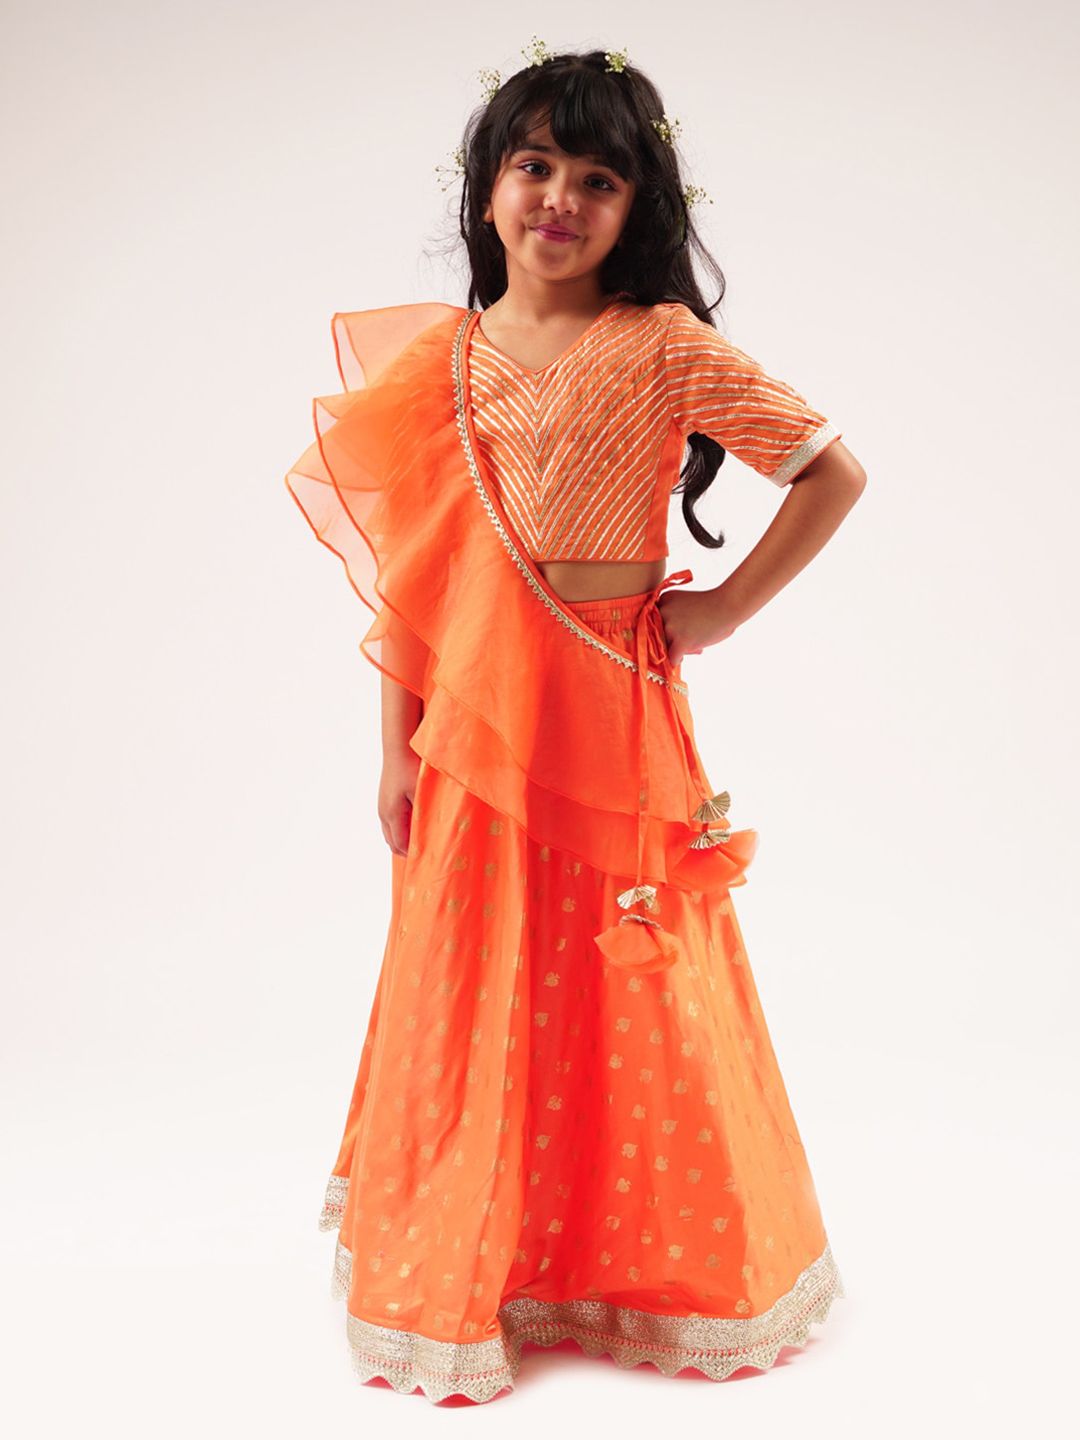 LIL DRAMA Girls Embellished Ready to Wear Cotton Lehenga & Blouse With Dupatta Price in India